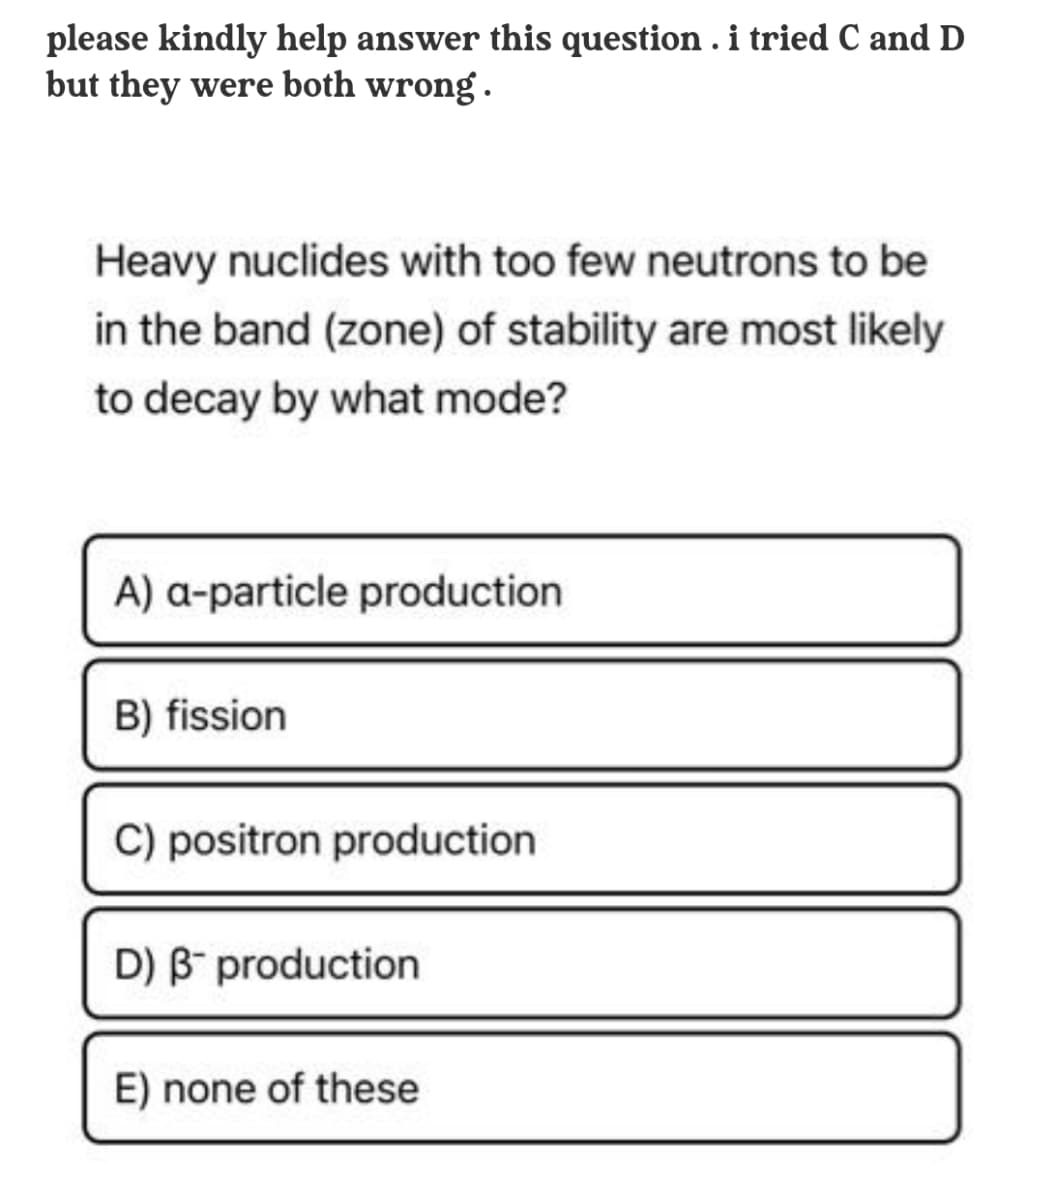 please kindly help answer this question . i tried C and D
but they were both wrong .
Heavy nuclides with too few neutrons to be
in the band (zone) of stability are most likely
to decay by what mode?
A) a-particle production
B) fission
C) positron production
D) B production
E) none of these
